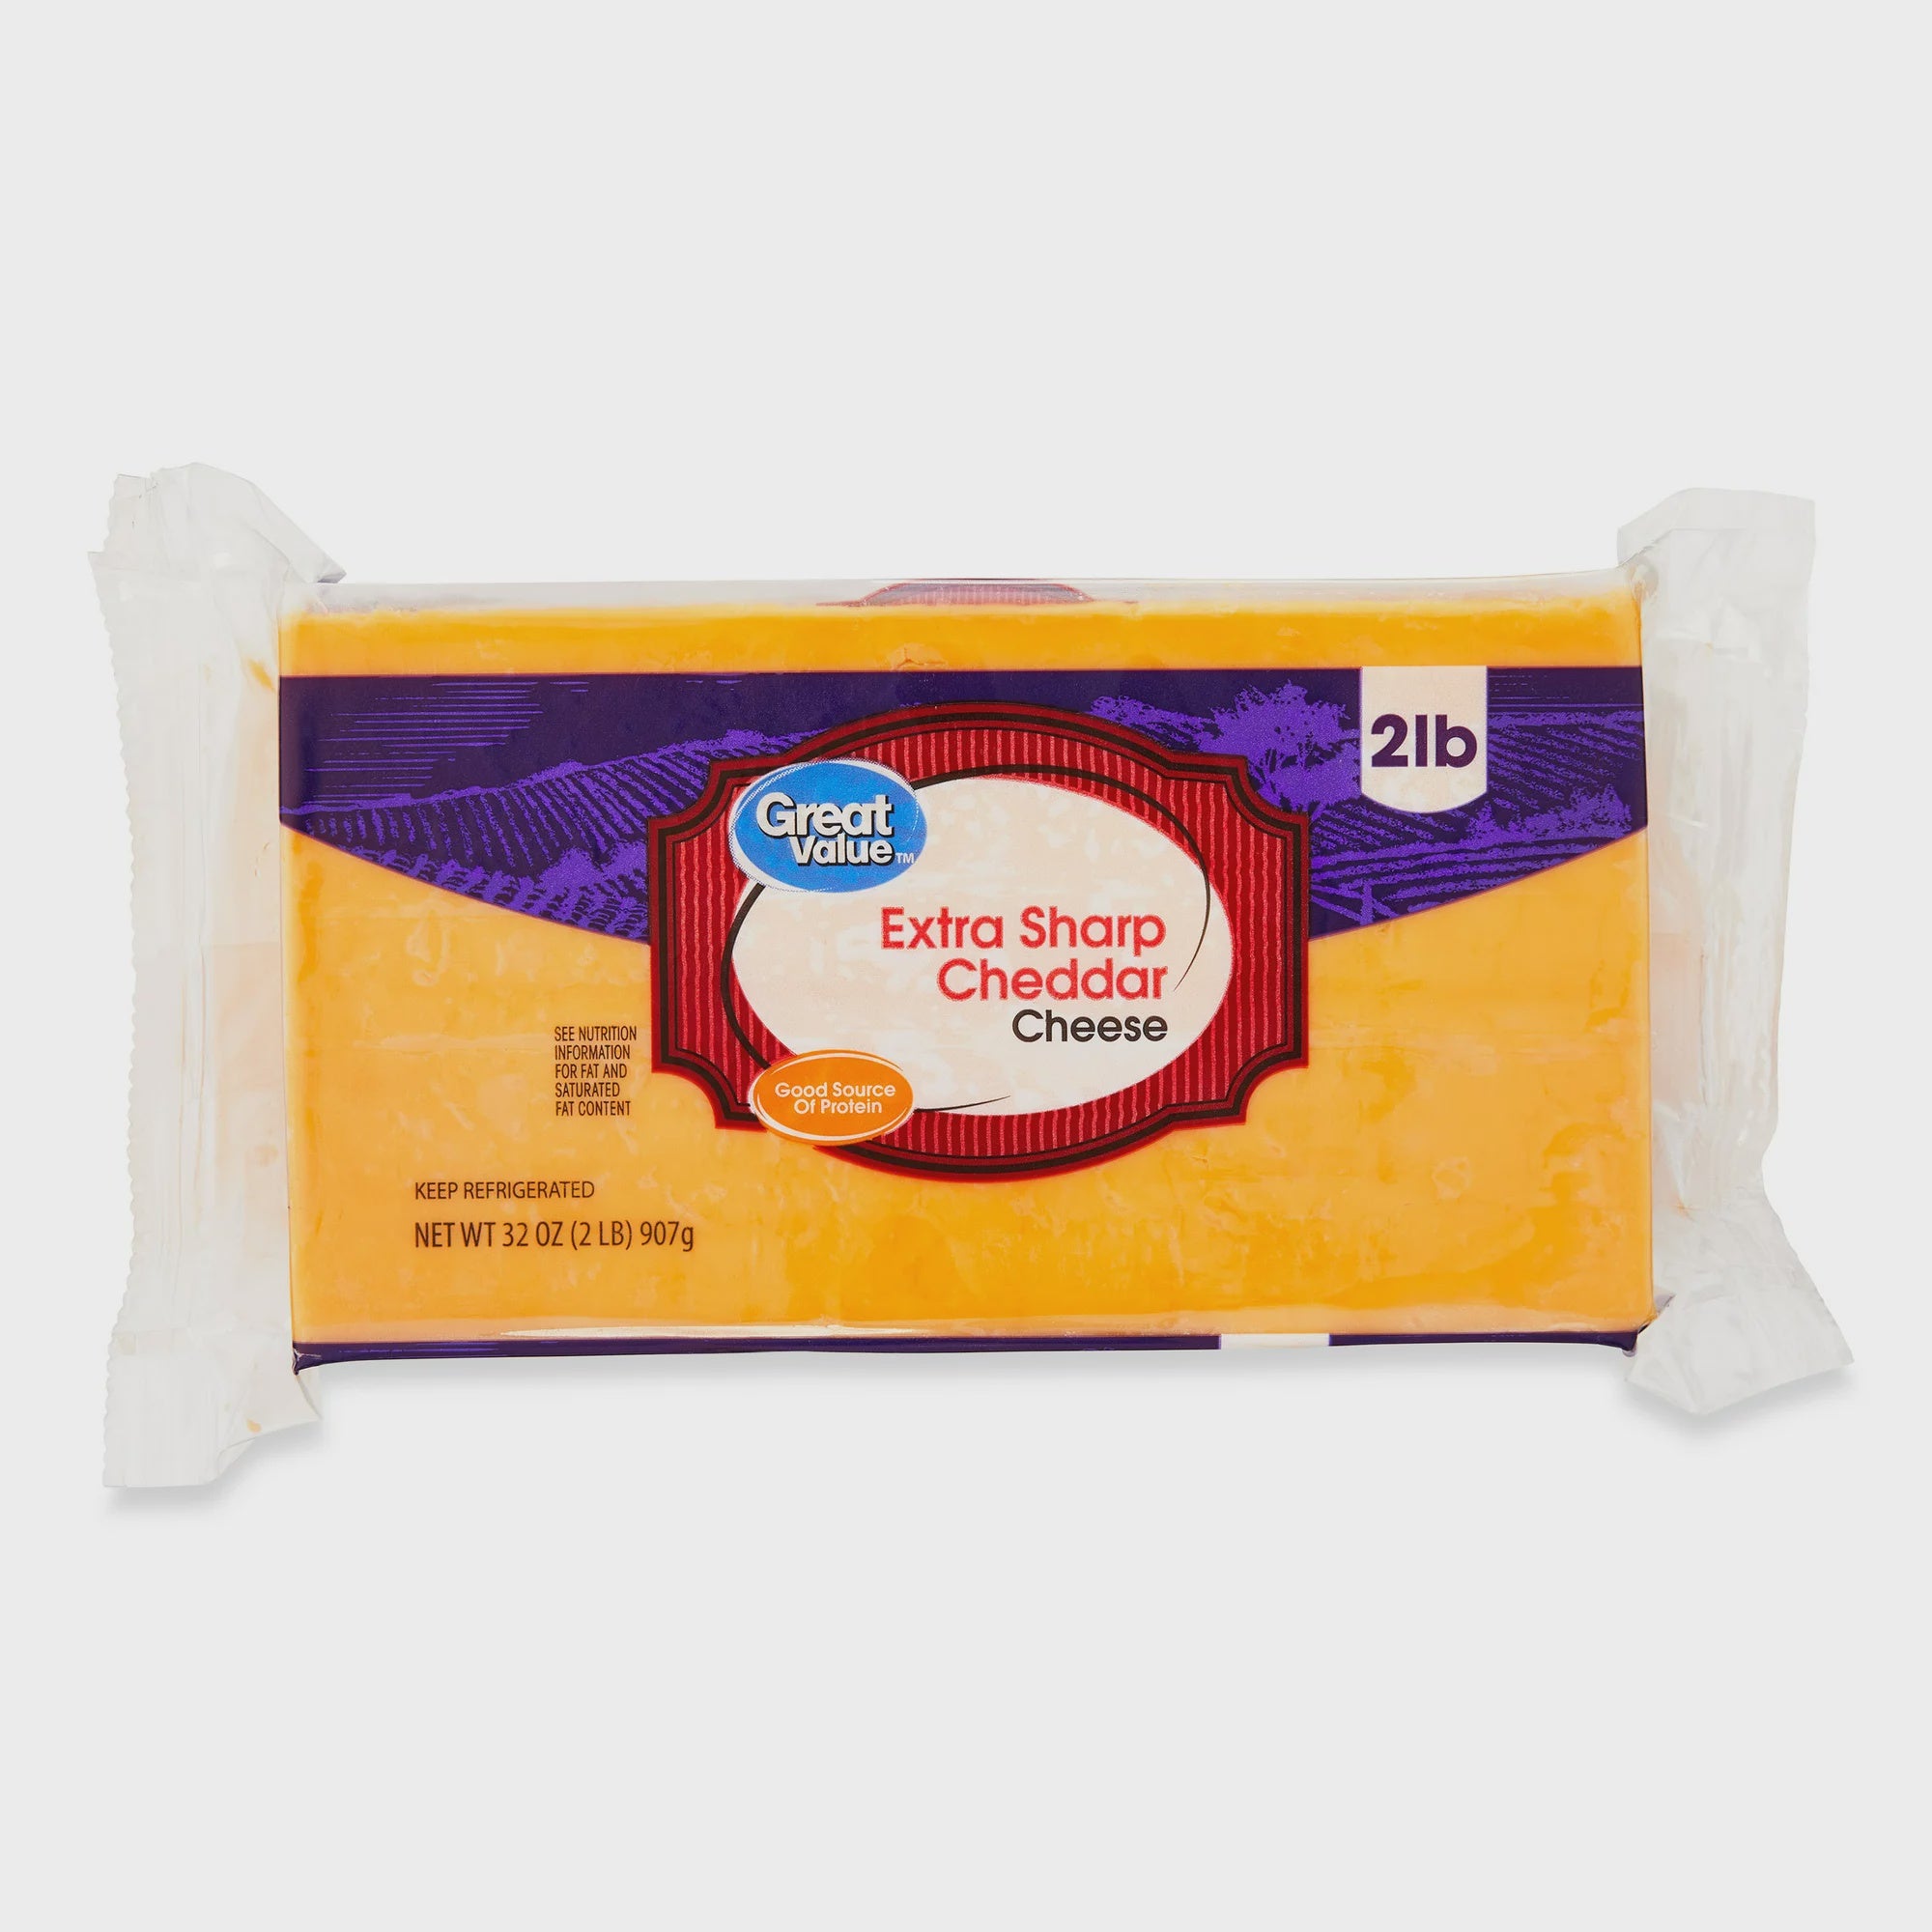 Great Value Extra Sharp Cheddar Cheese, 32 oz